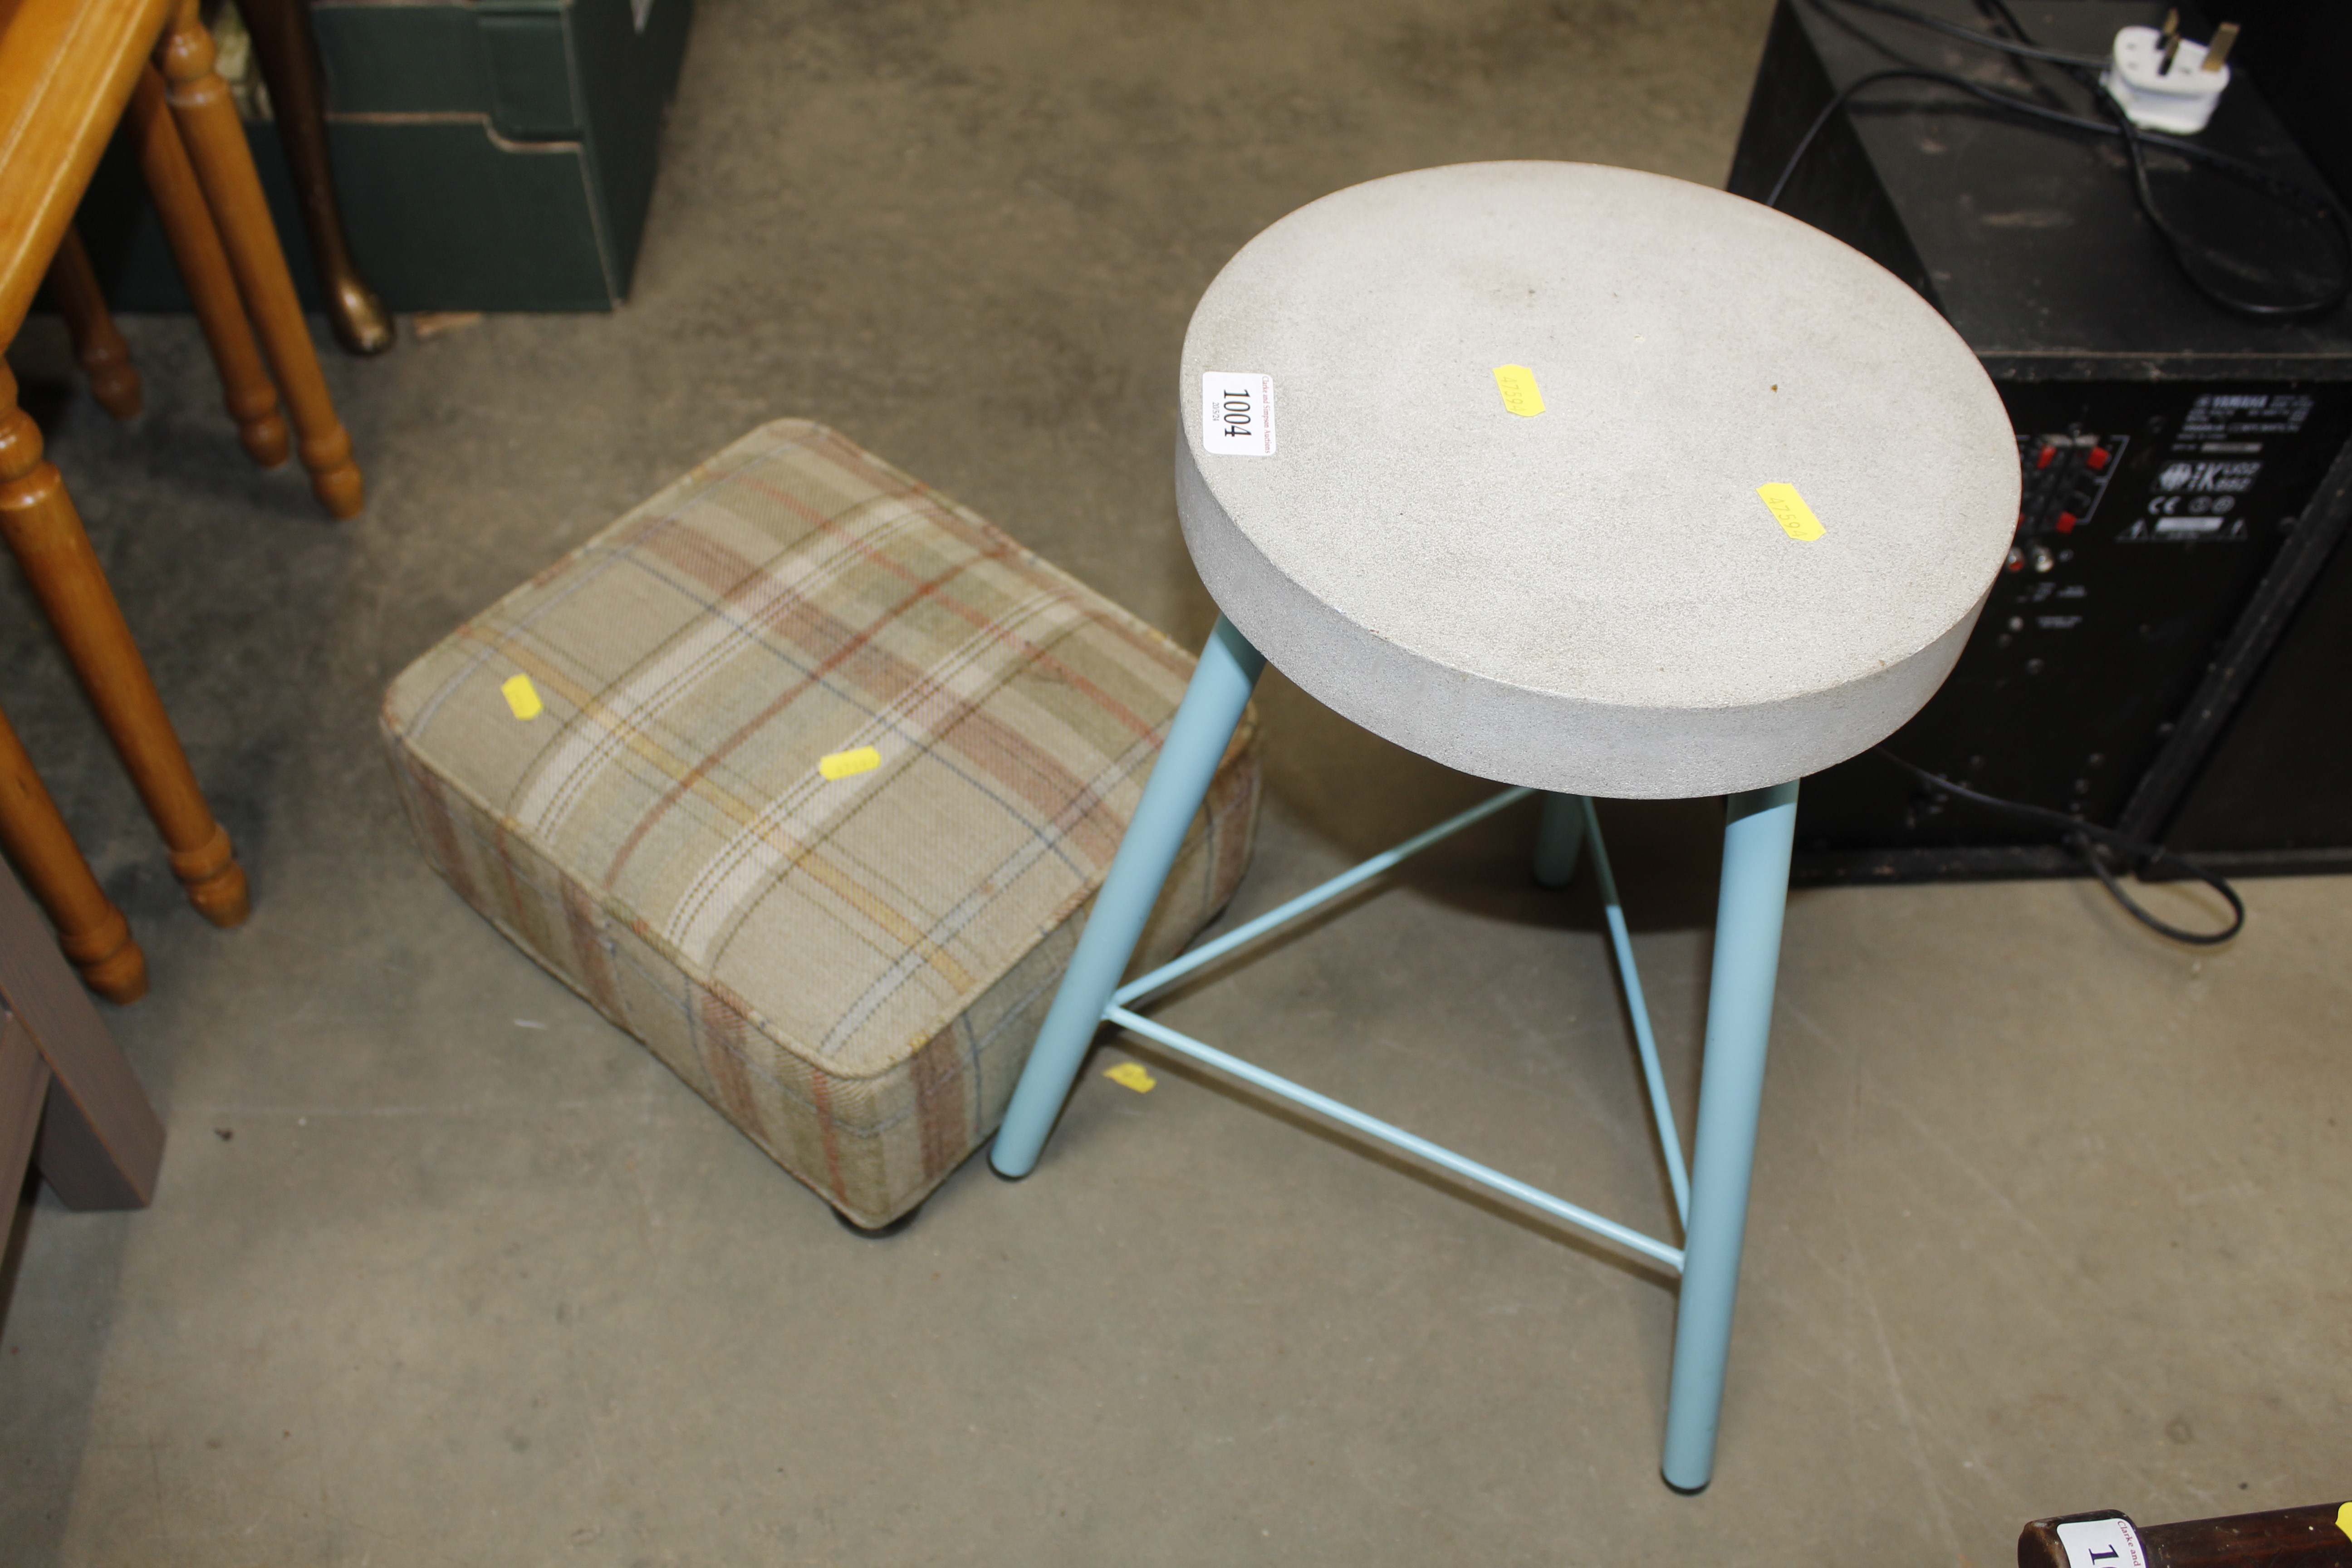 A stone seated stool and a footstool